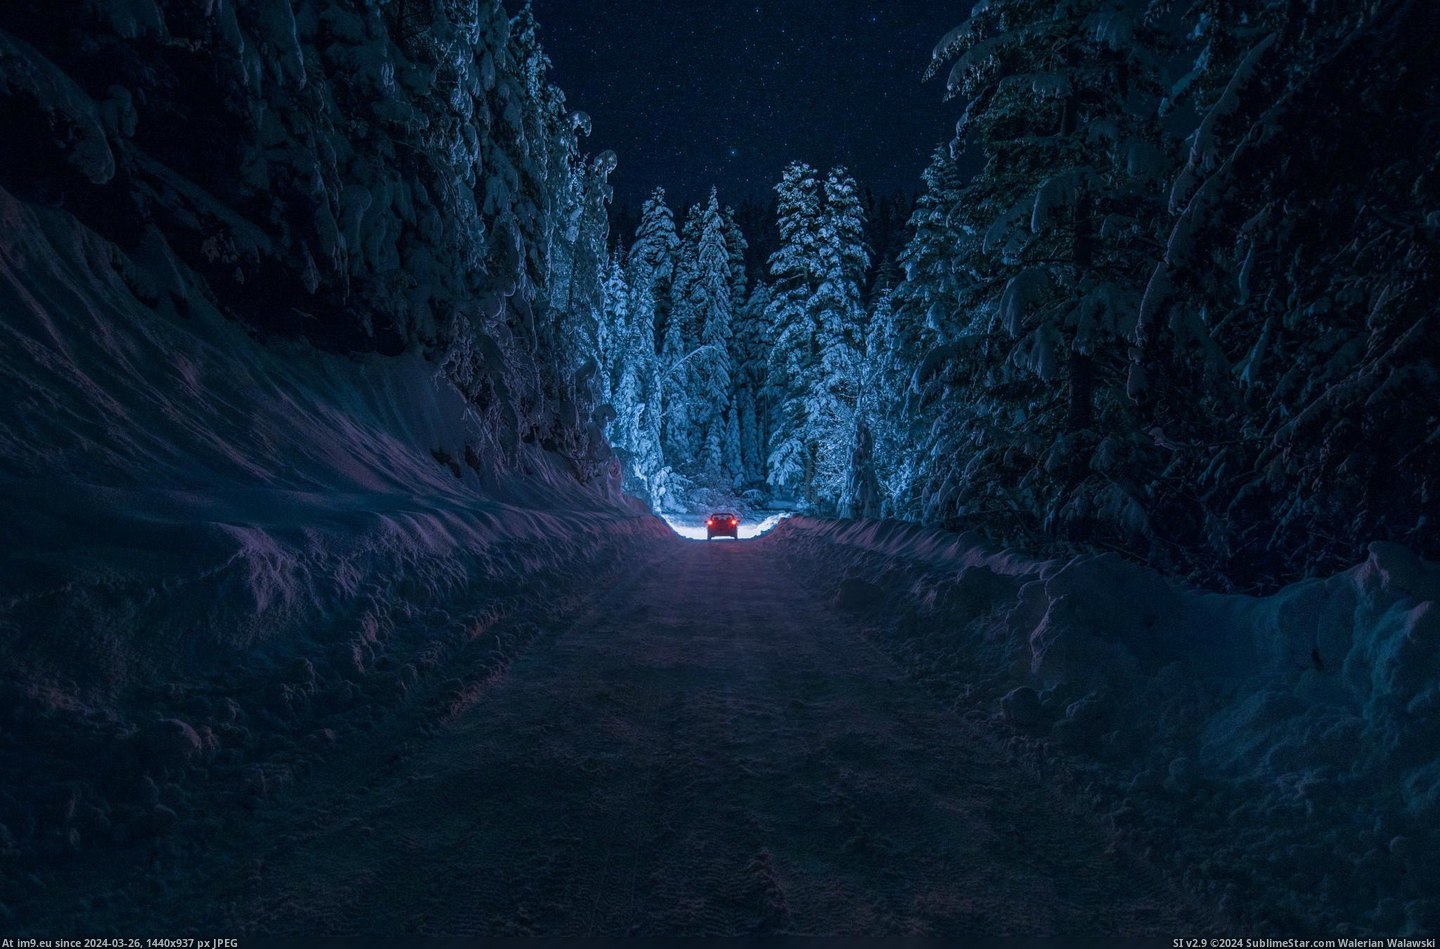 #Forest #Snowy #Peaceful #Driving [Pics] Driving through a very peaceful snowy forest. Pic. (Bild von album My r/PICS favs))